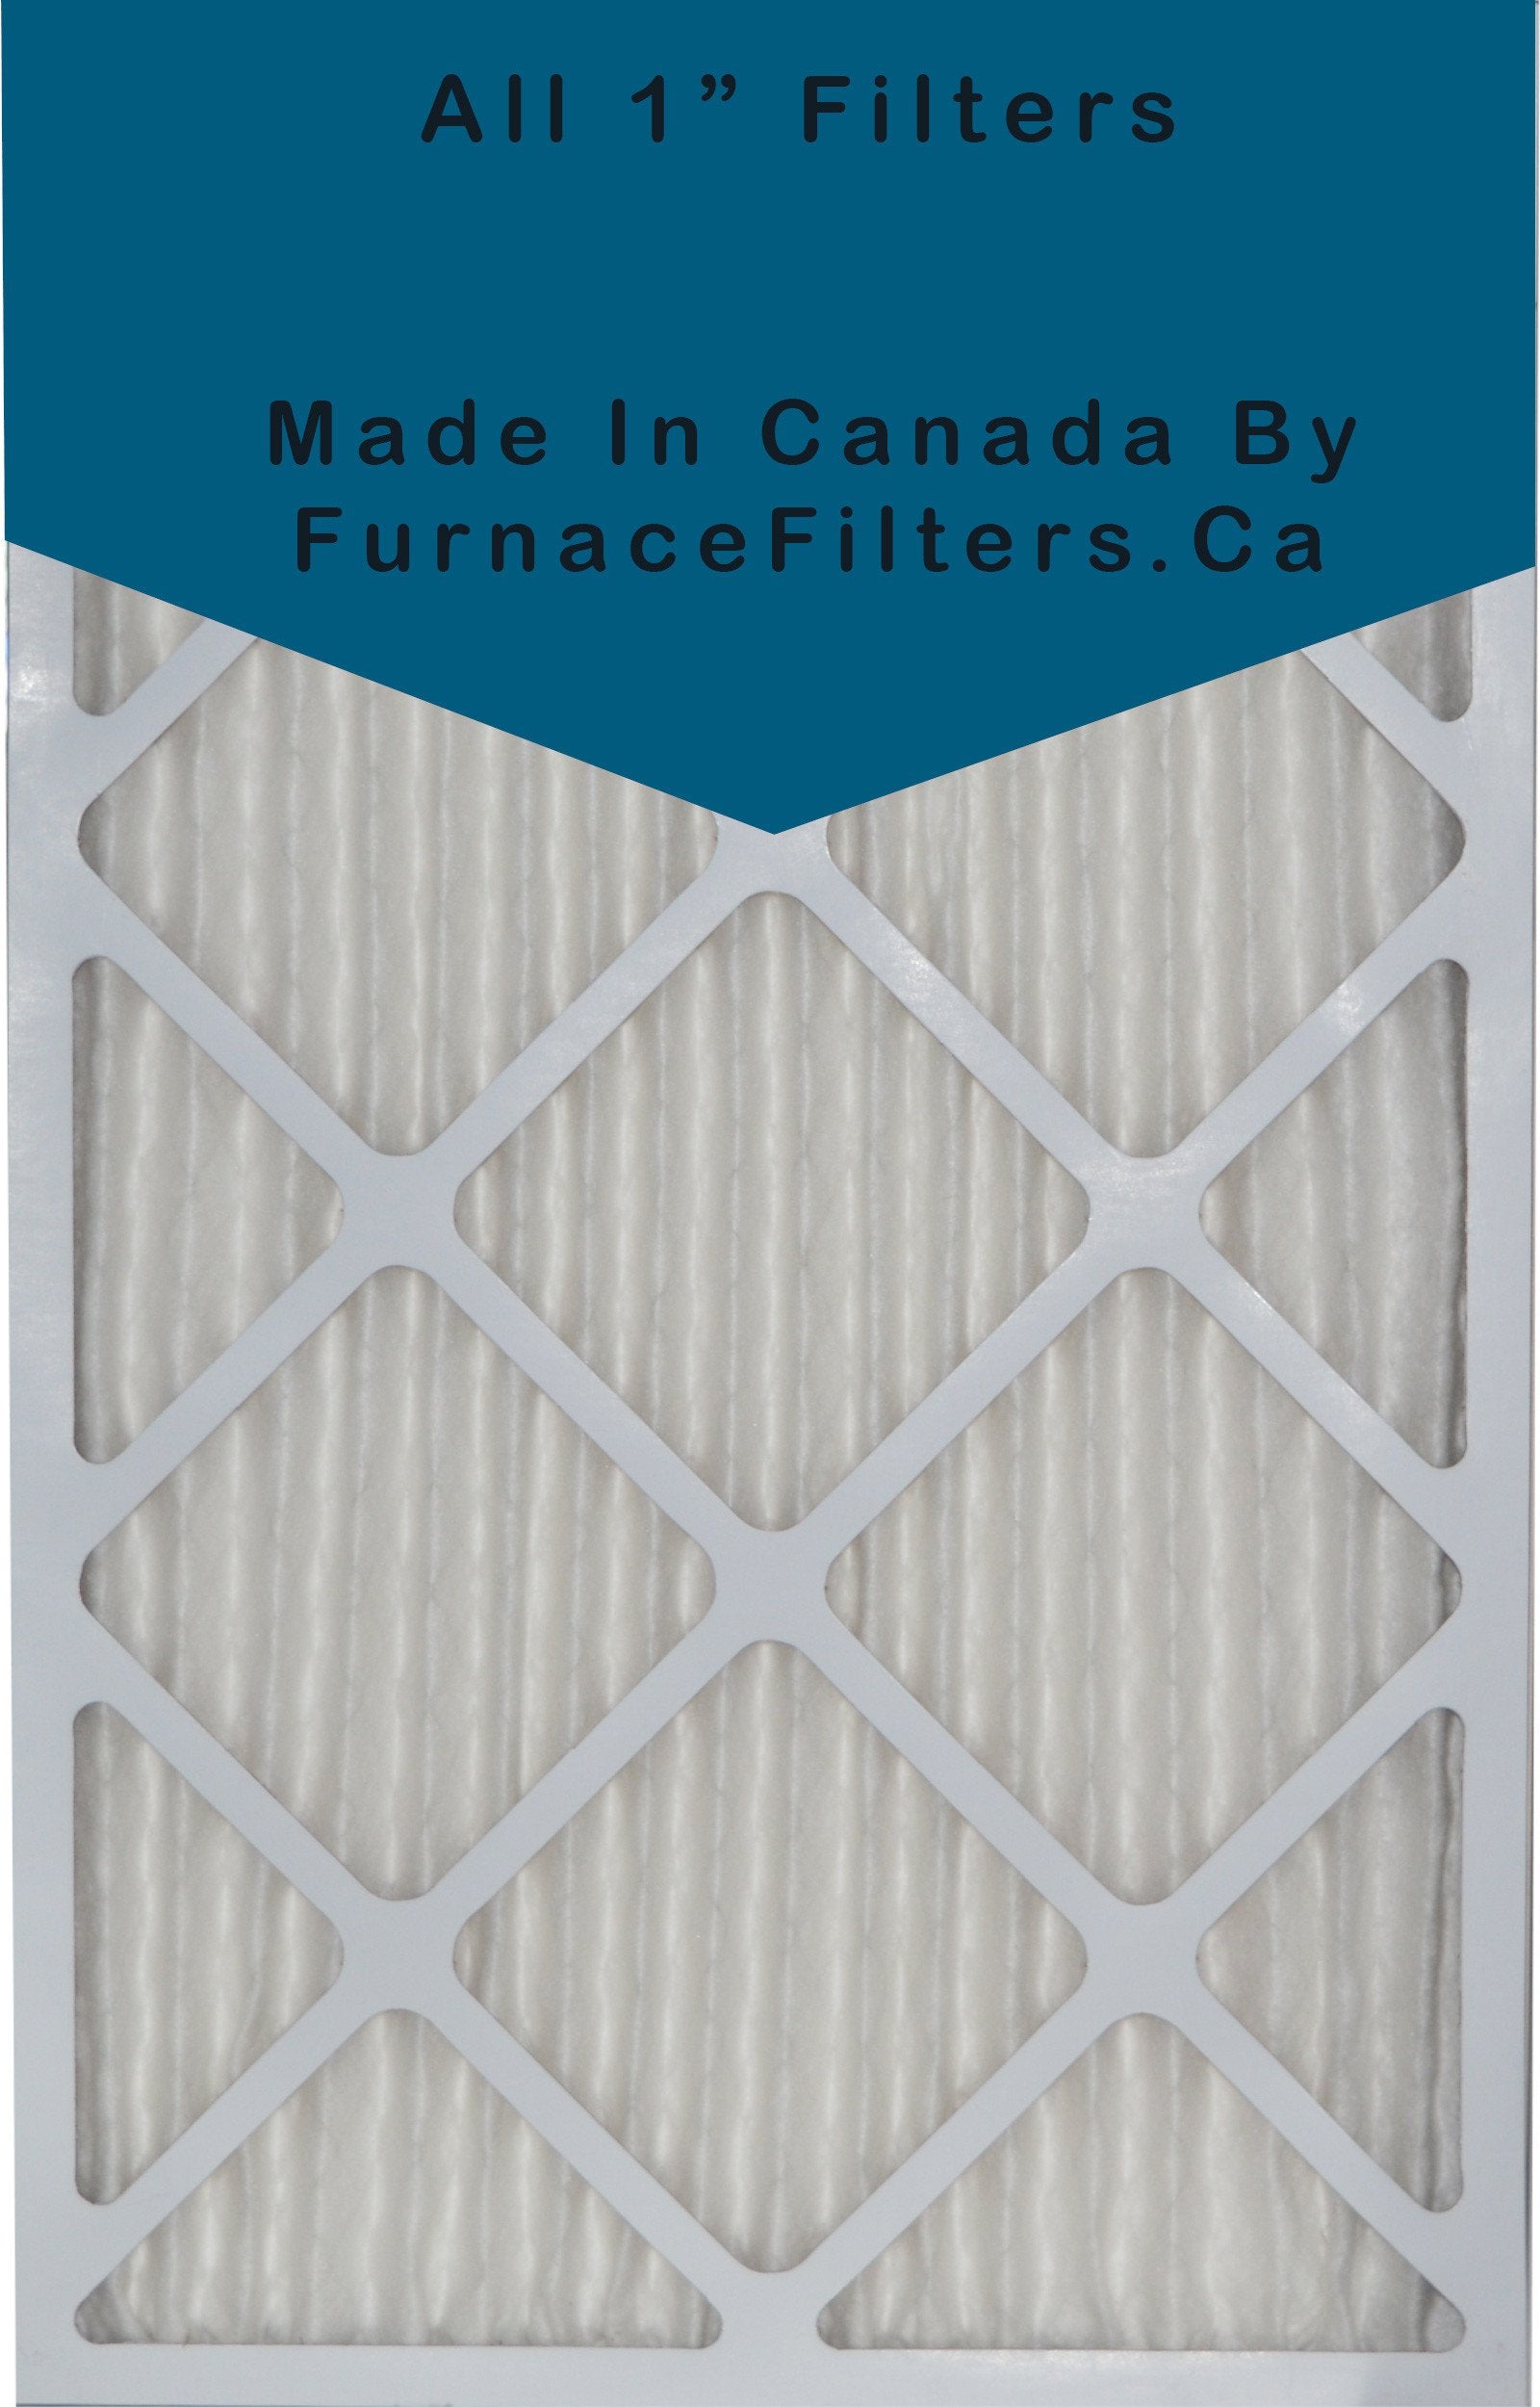 28x30x1 Furnace Filter MERV 8 Pleated Filters. Case of 6